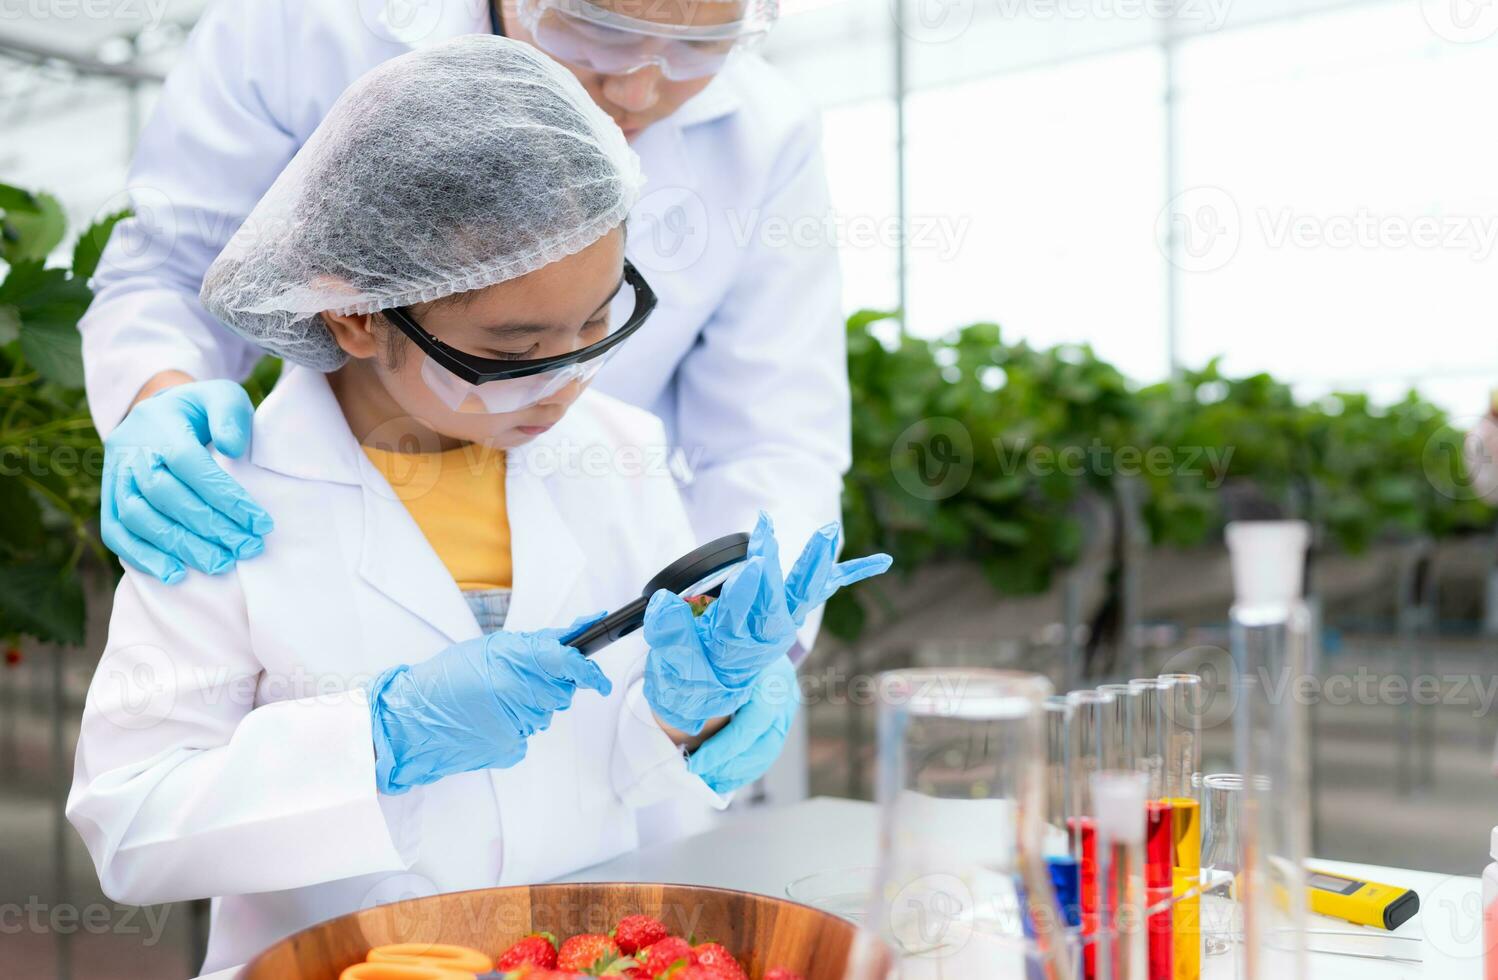 In the closed strawberry garden, a young scientist conducts a strawberry nutrient production experiment with her science class. photo